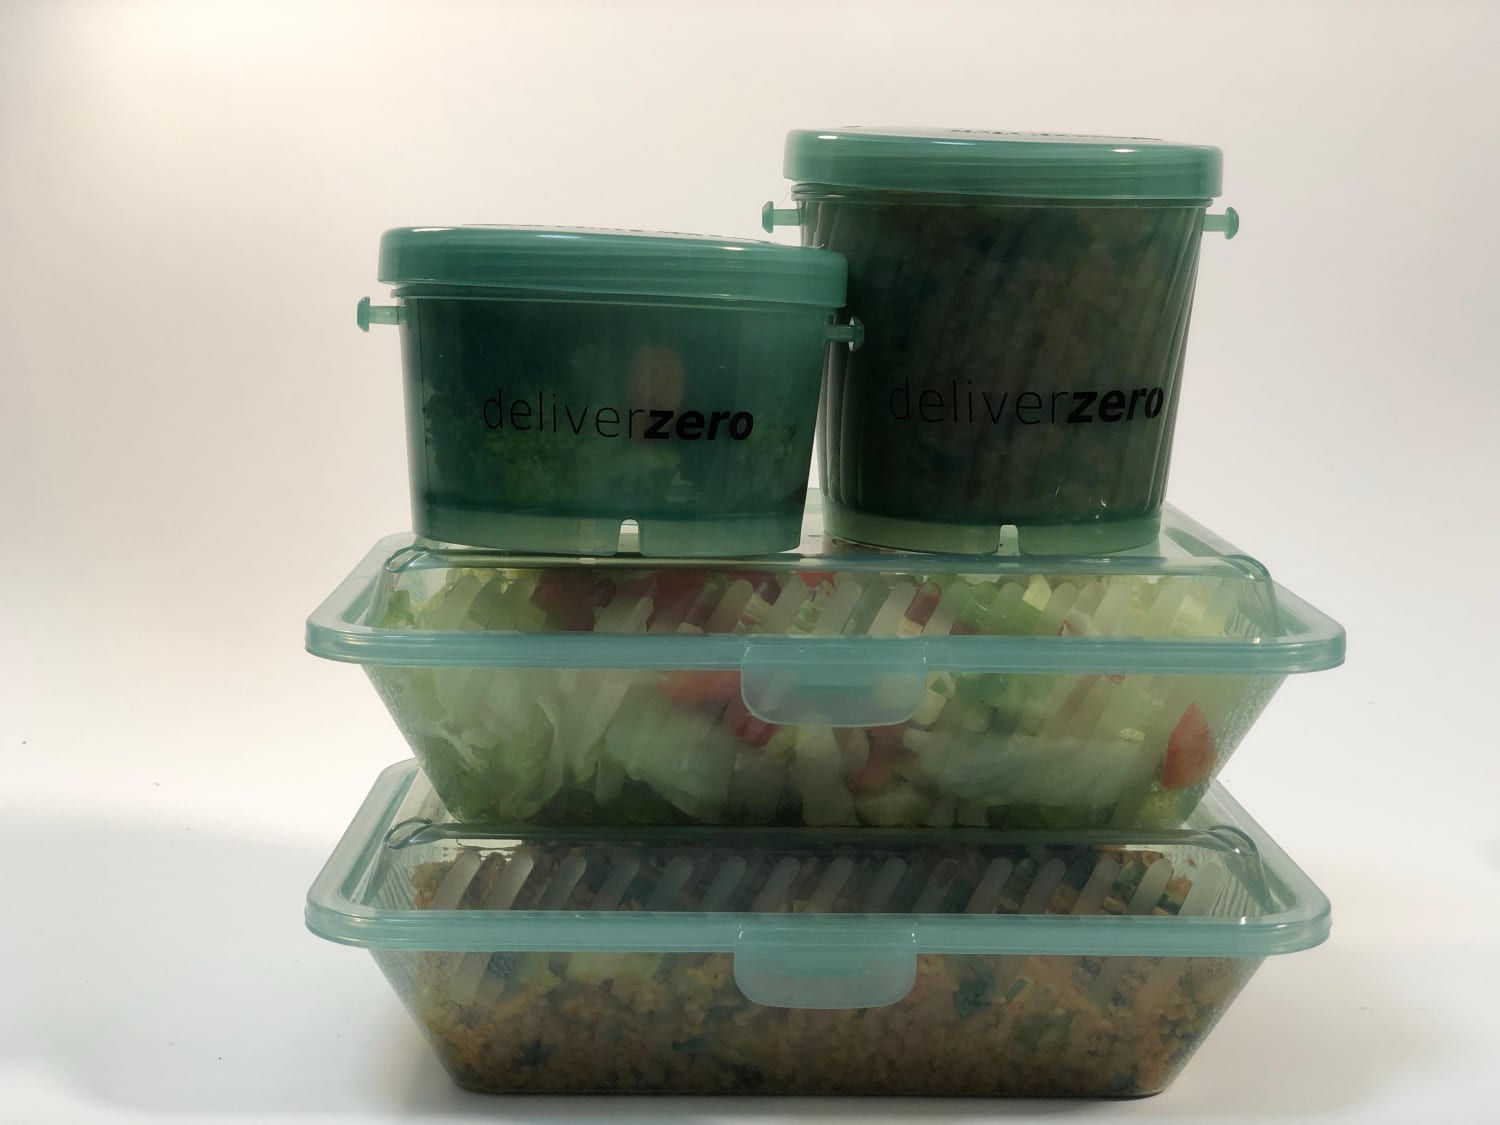 This US startup is making take-out food delivery more sustainable